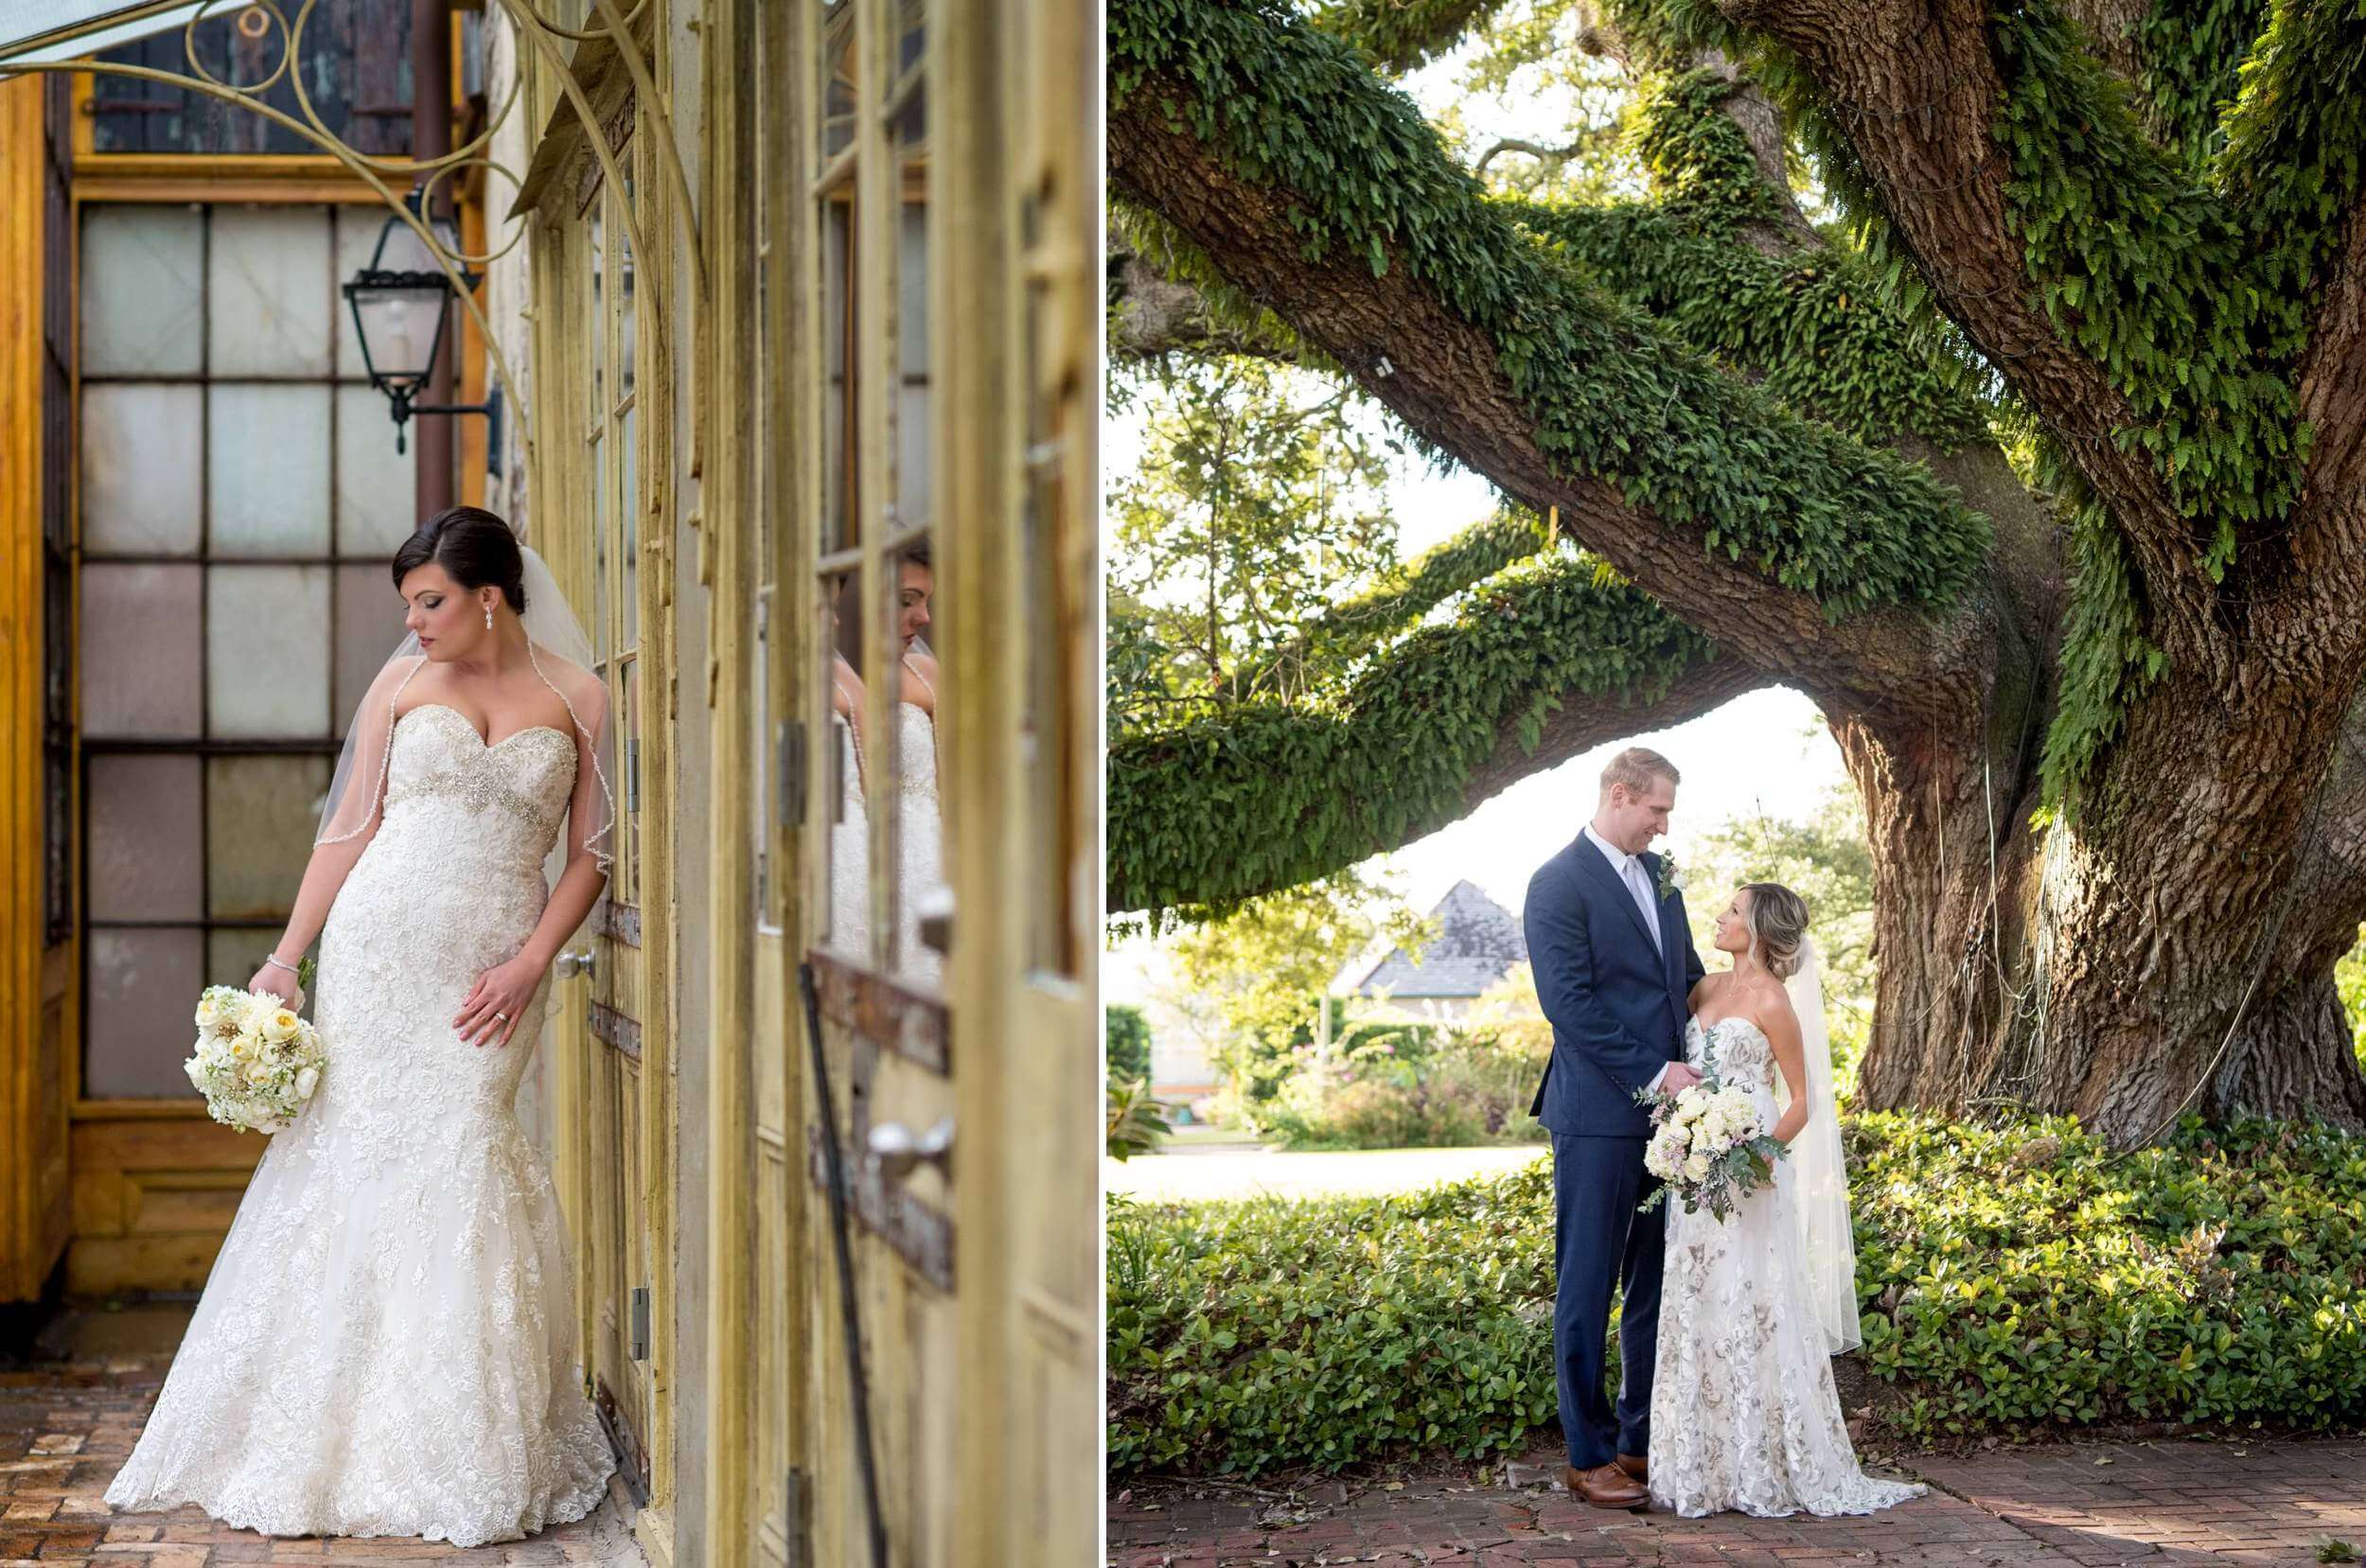 Race and Religious bridal portrait plus a New Orleans bride and groom at their City Park wedding. Images by the New Orleans wedding photographers at The Red M Studio.